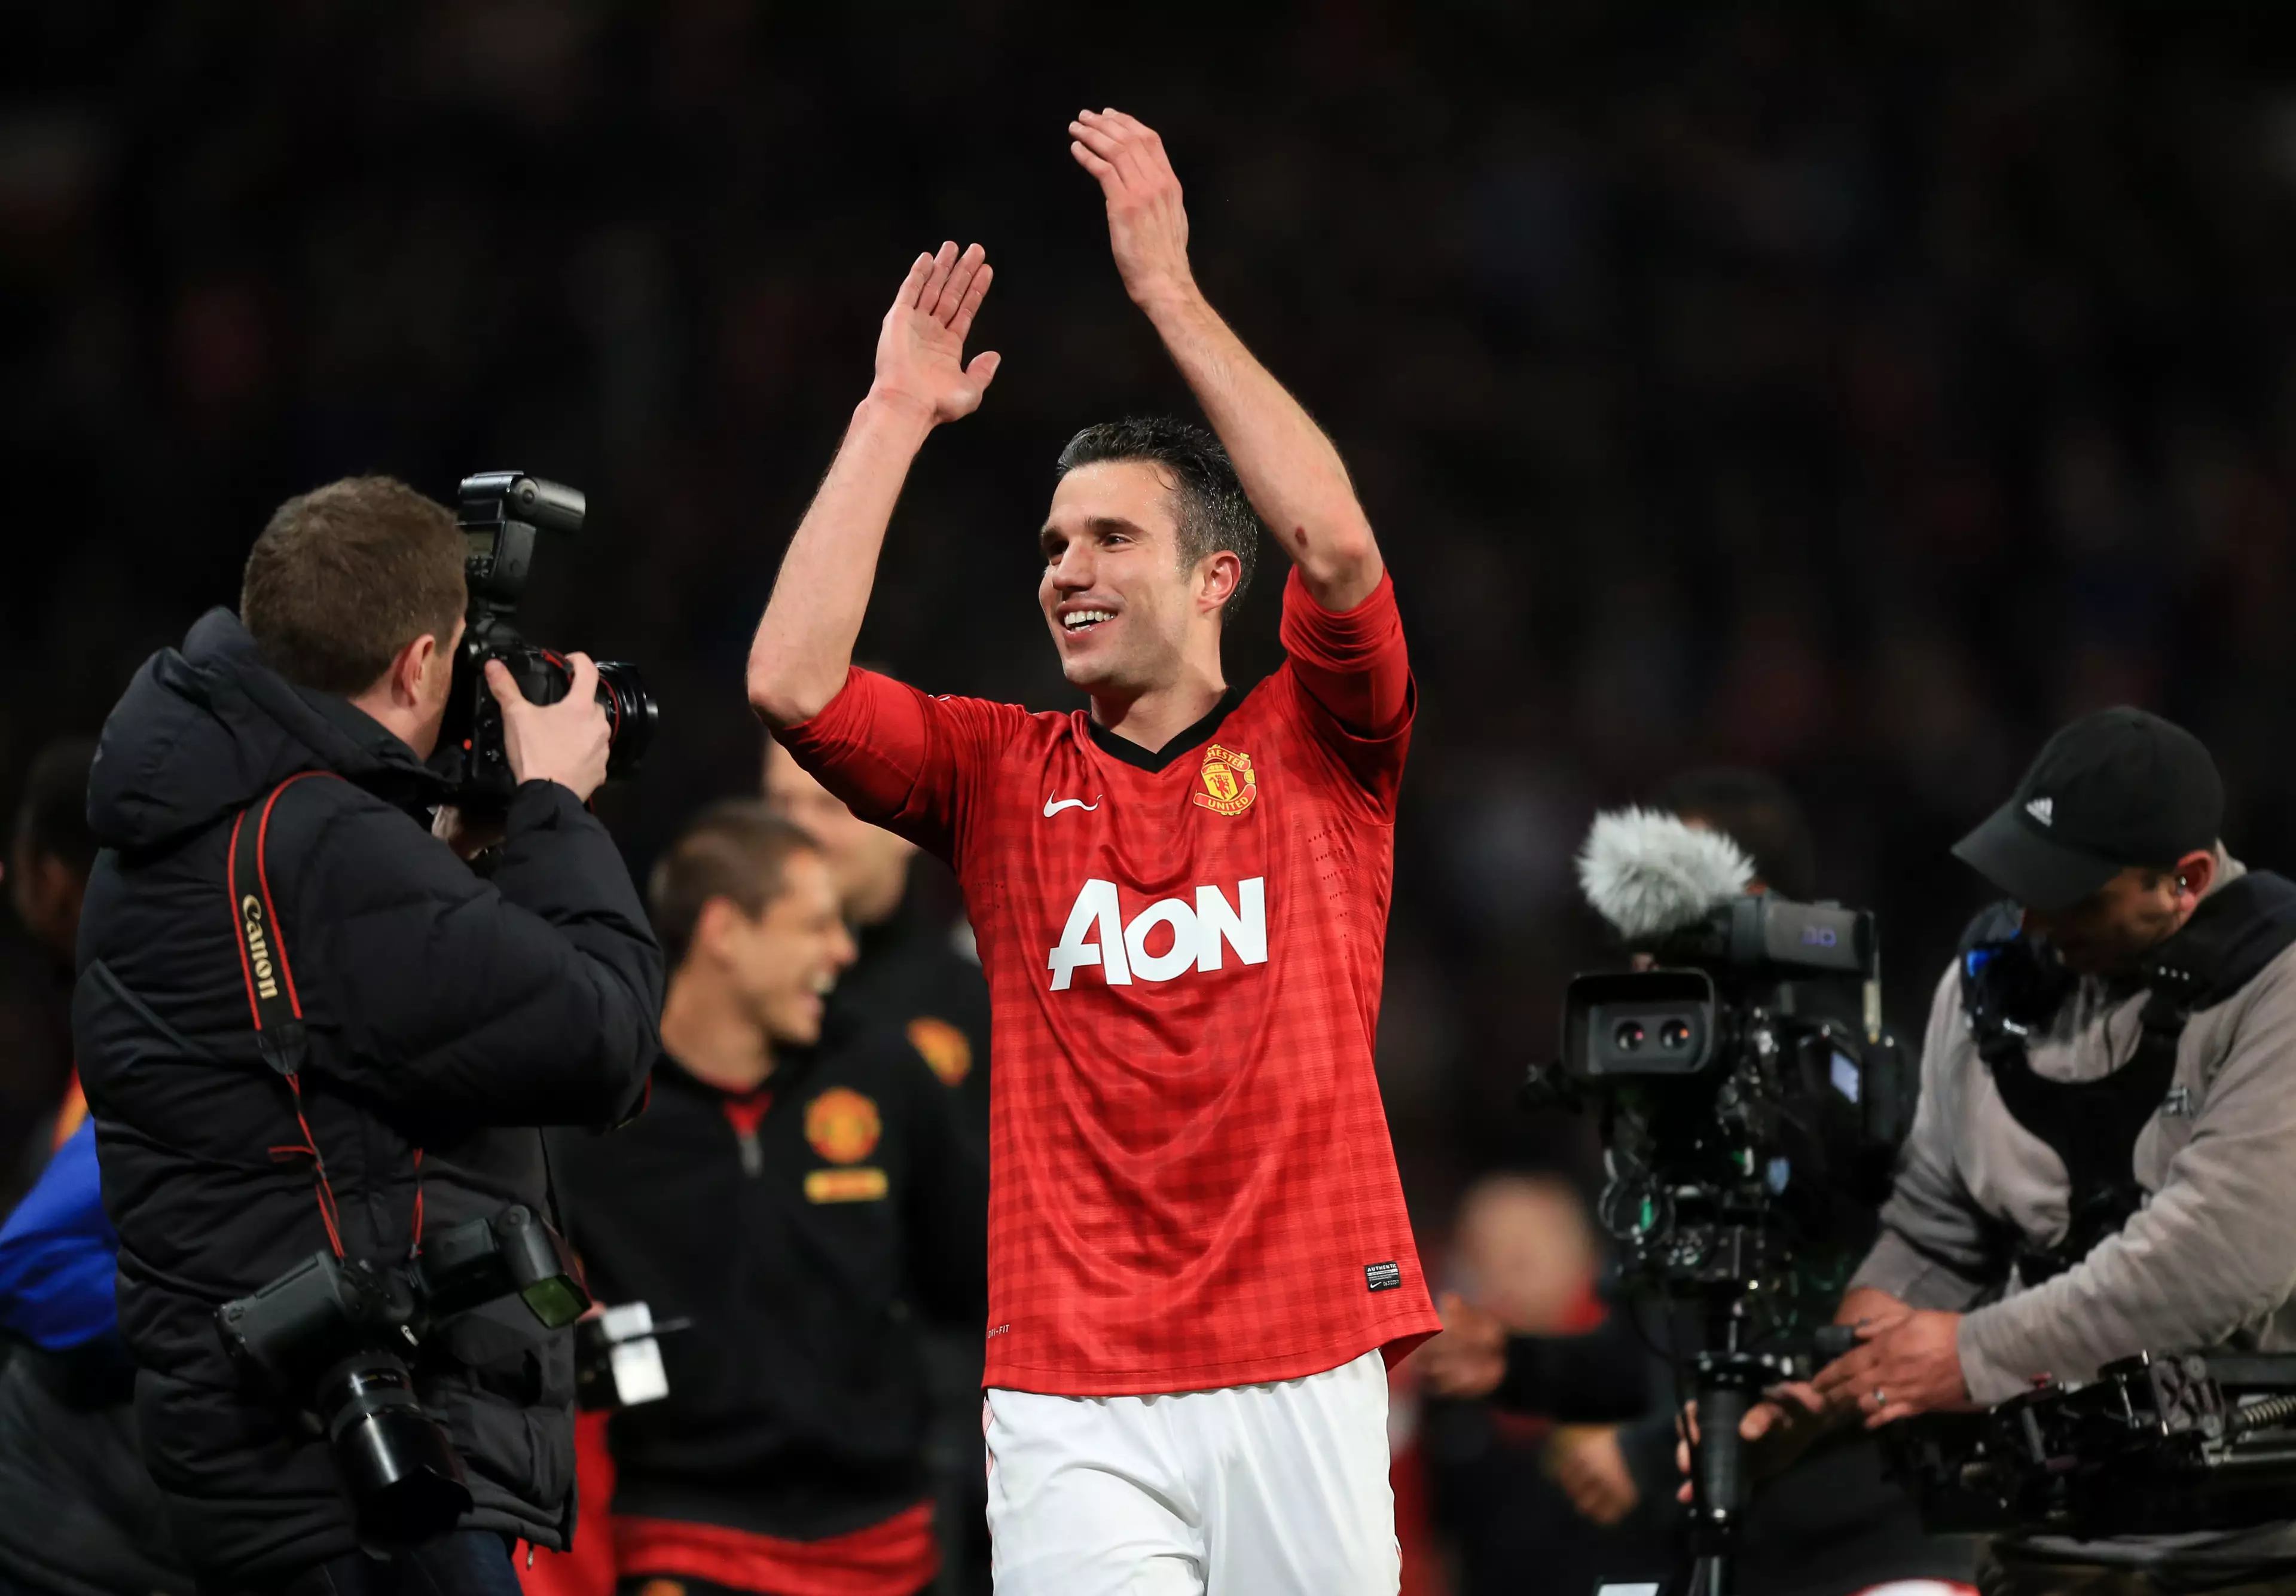 Van Persie celebrates winning the Premier League with United. Image: PA Images